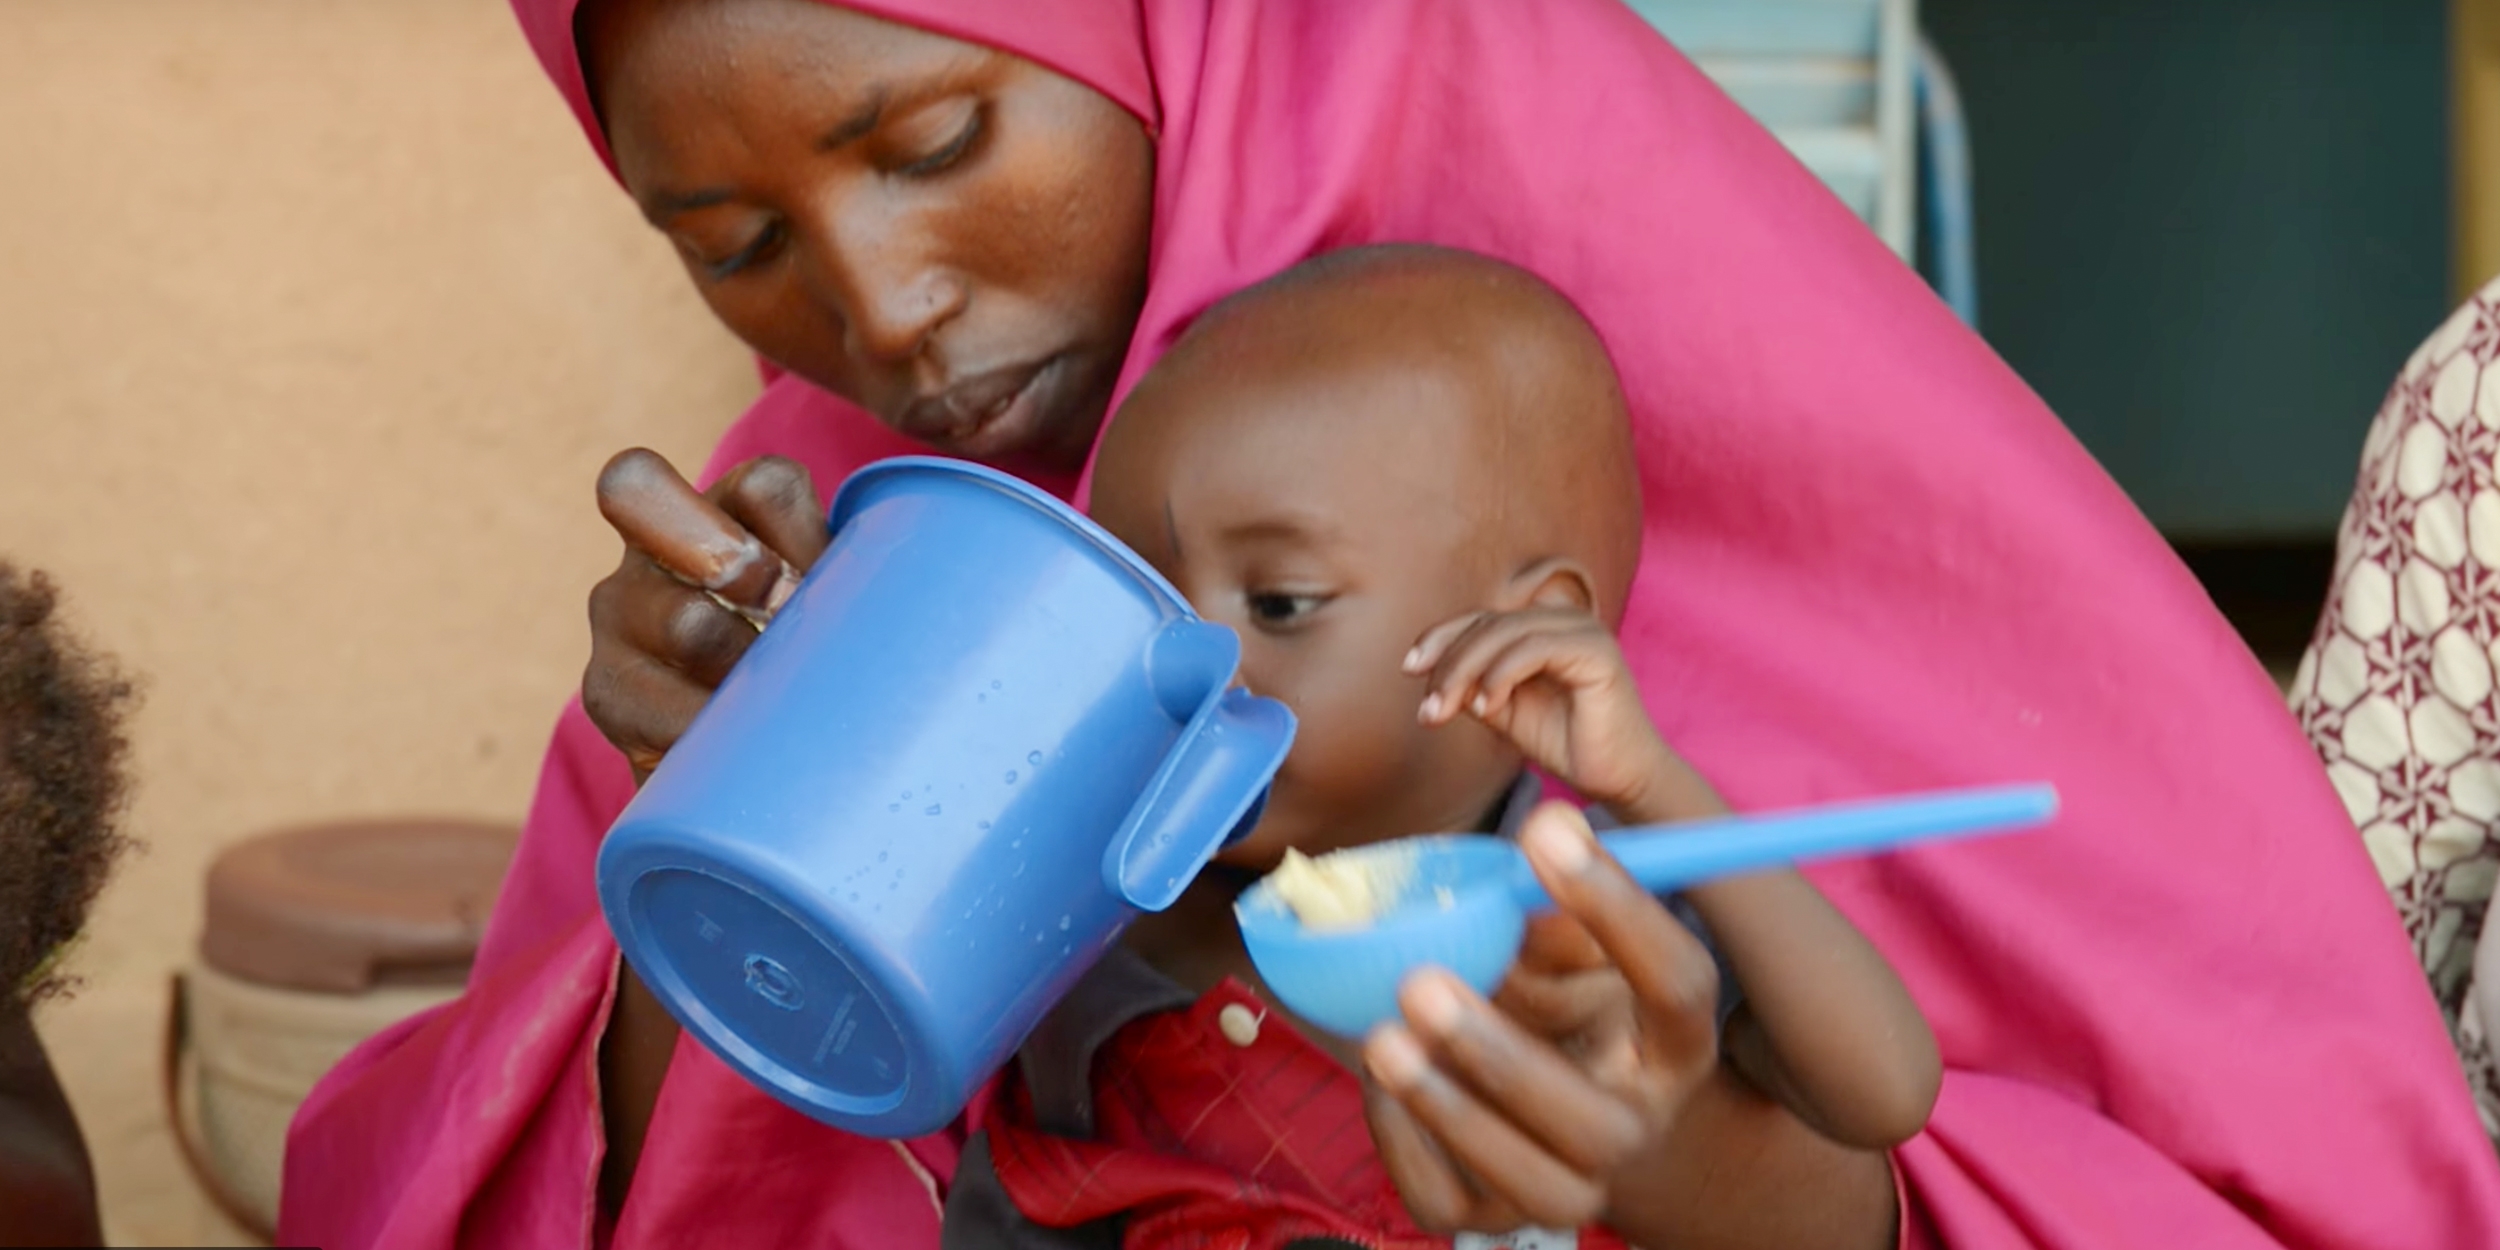 A woman feeds her child from a blue cup.